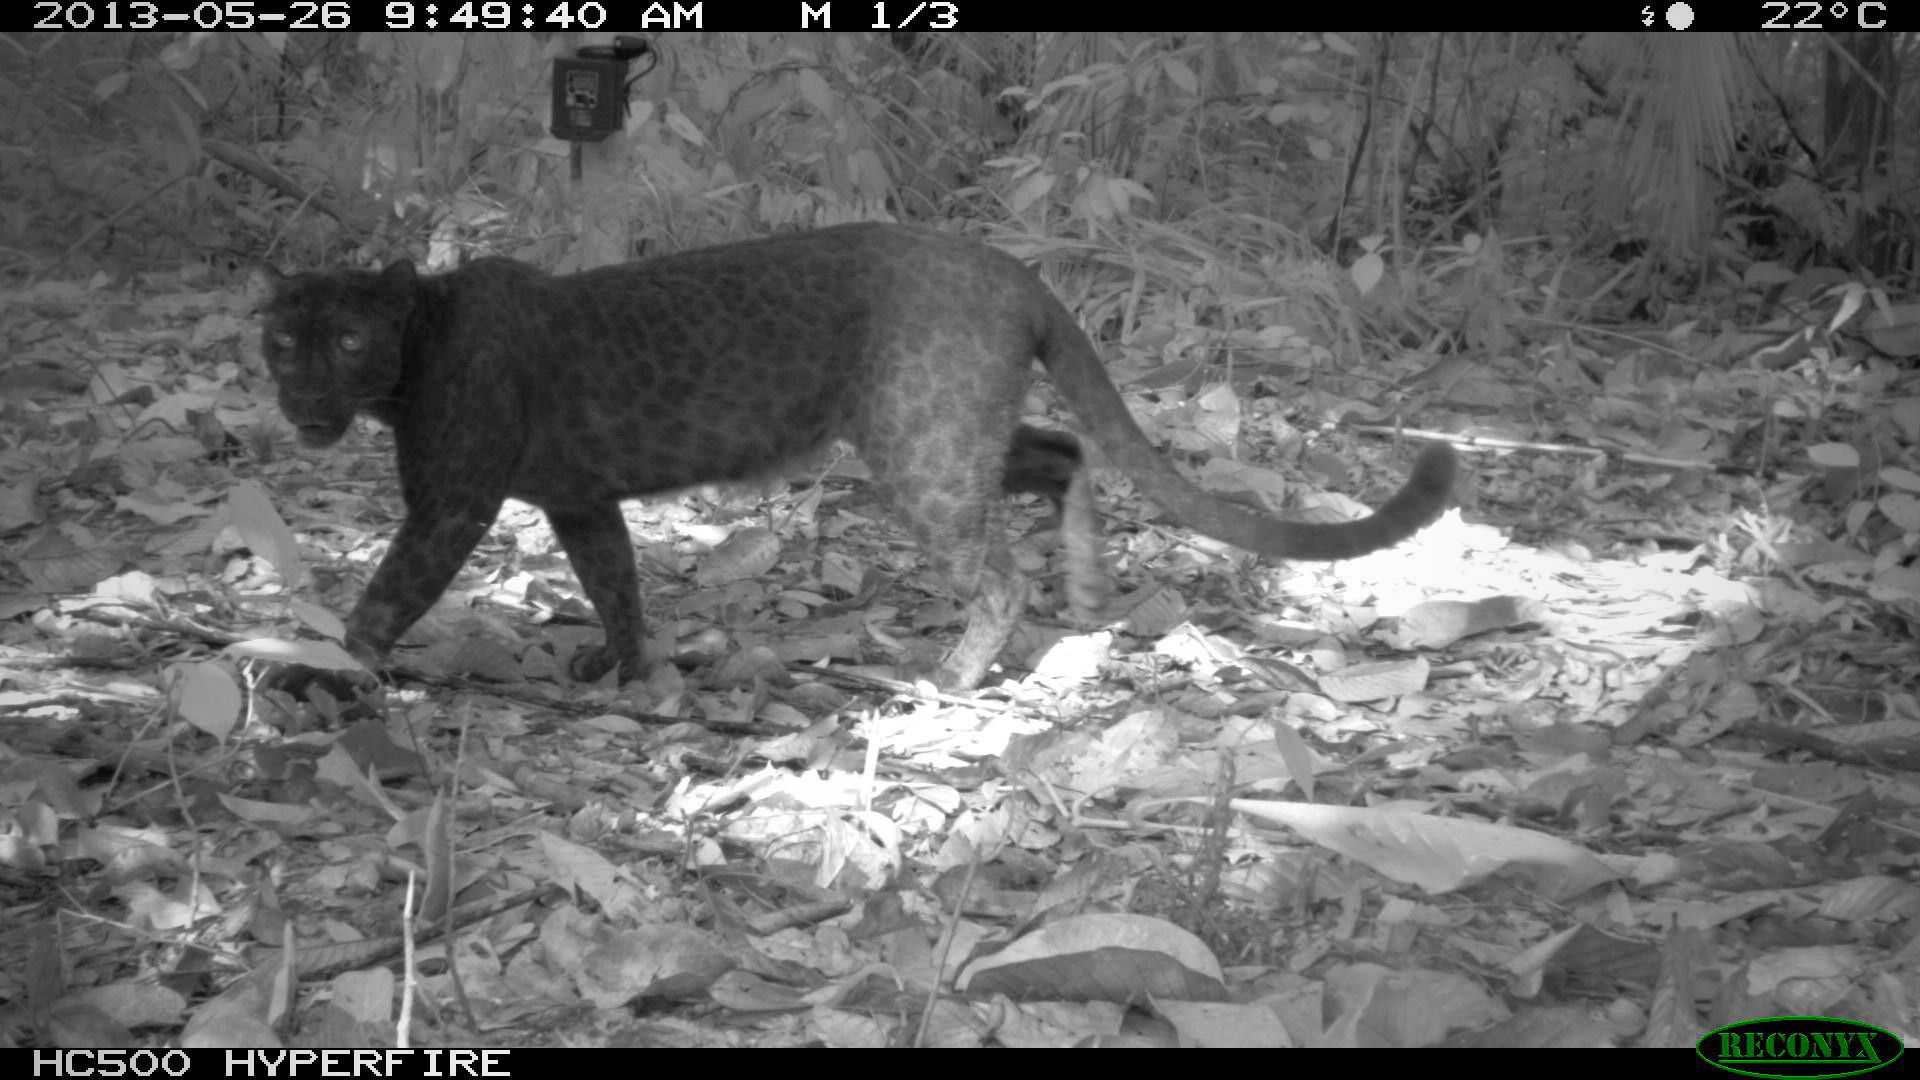 A "black panther" caught on a camera trap